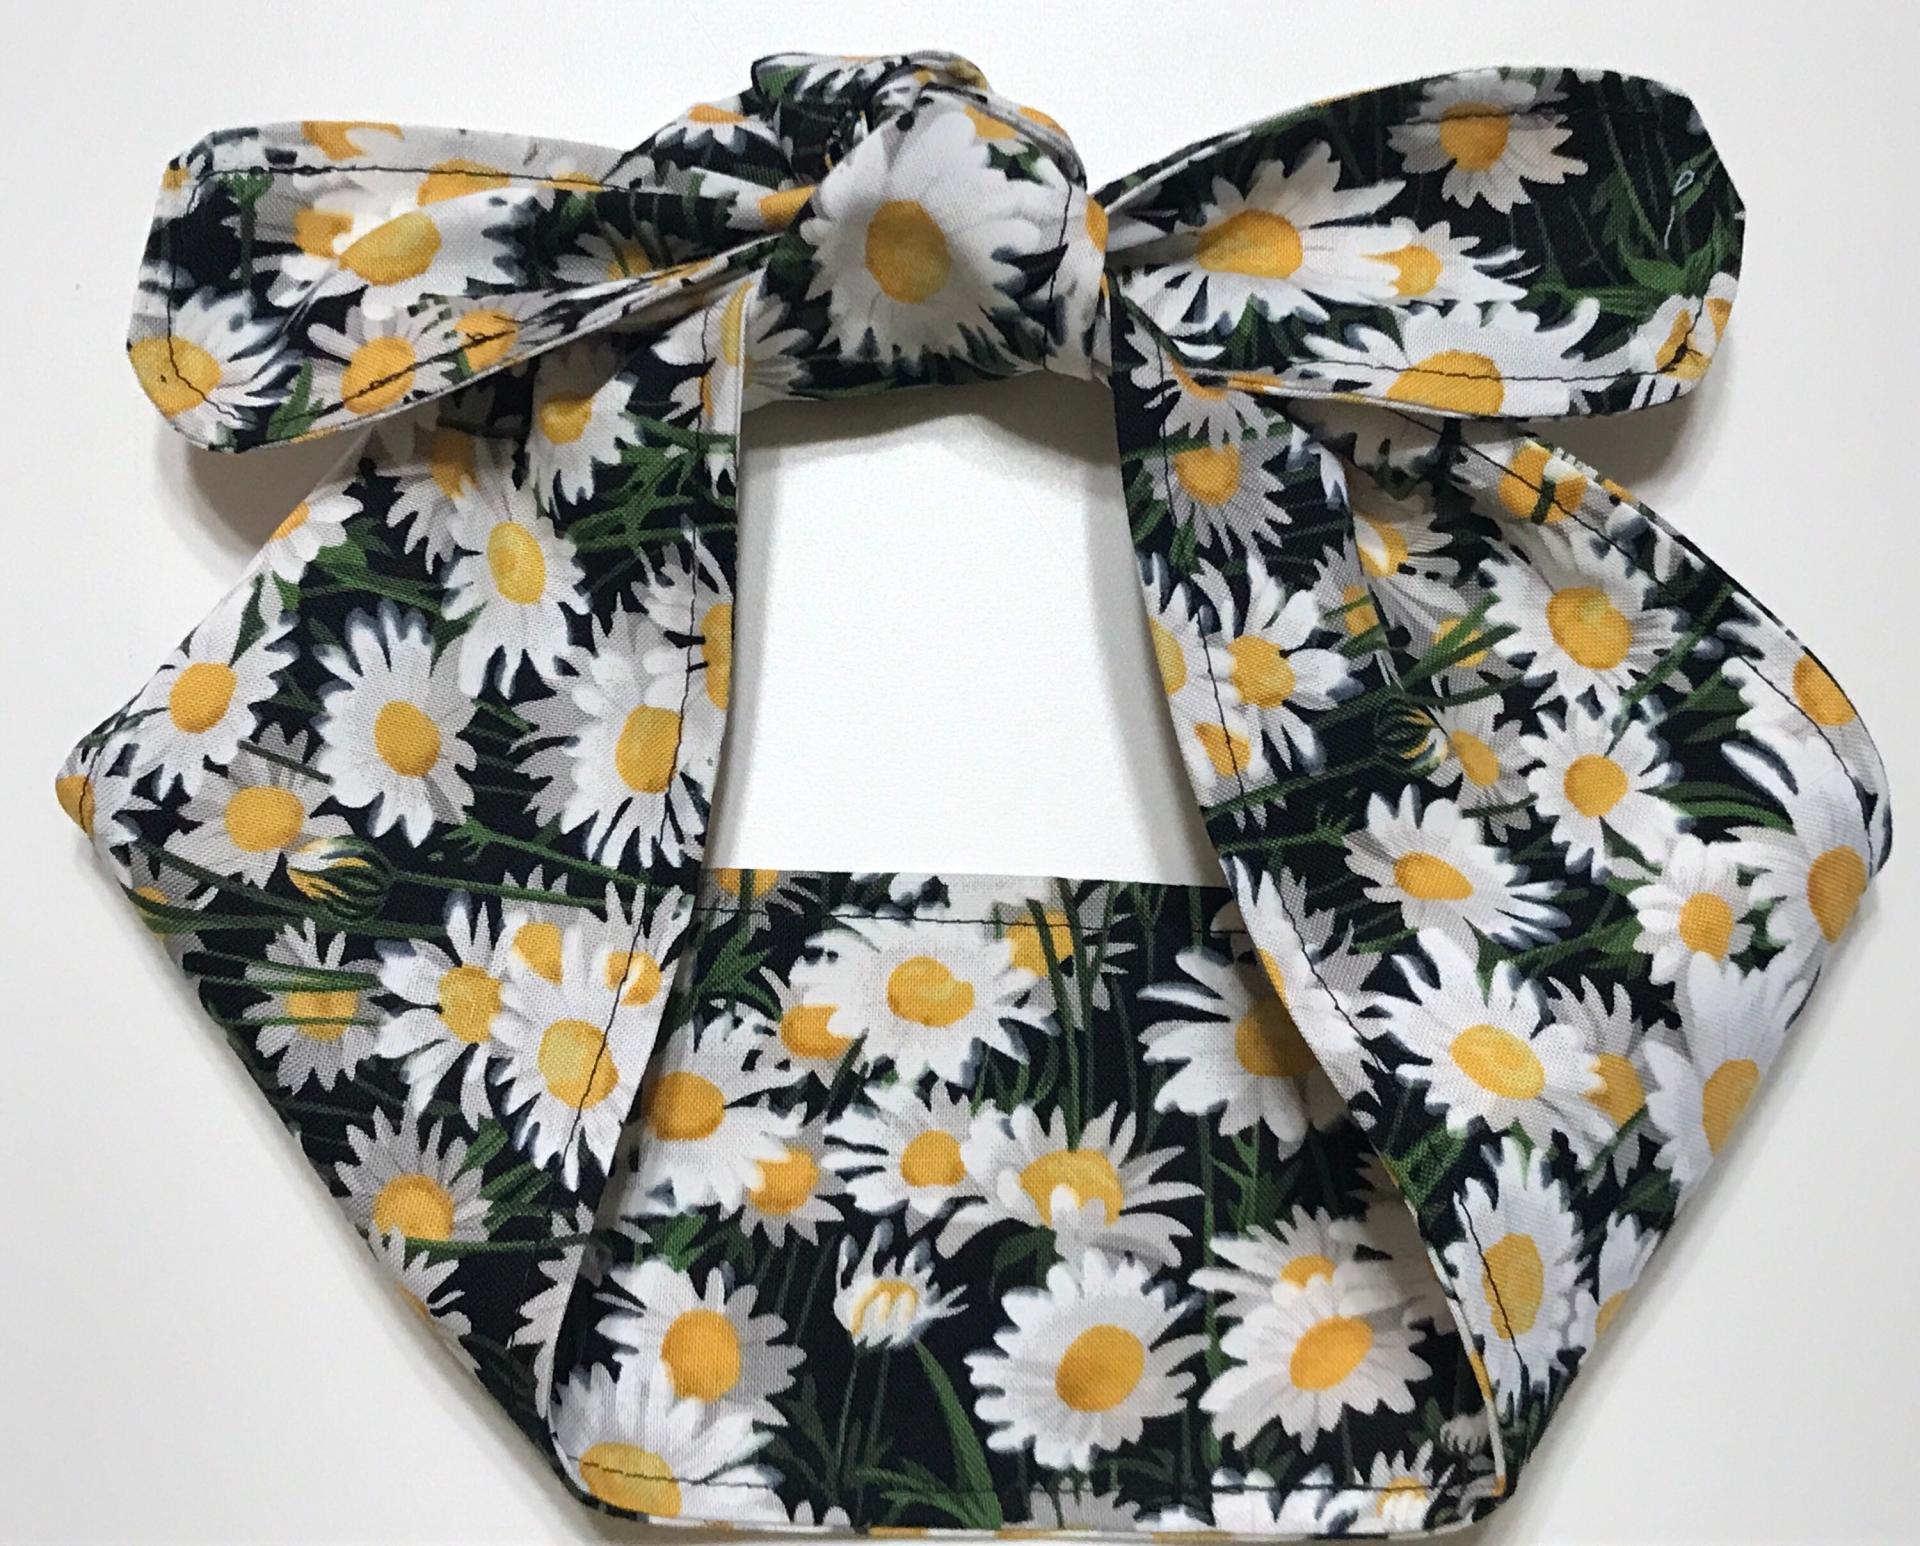 3” Wide Daisies Floral headband, self tie, hair wrap, pin up style, hair tie, retro style, rockabilly